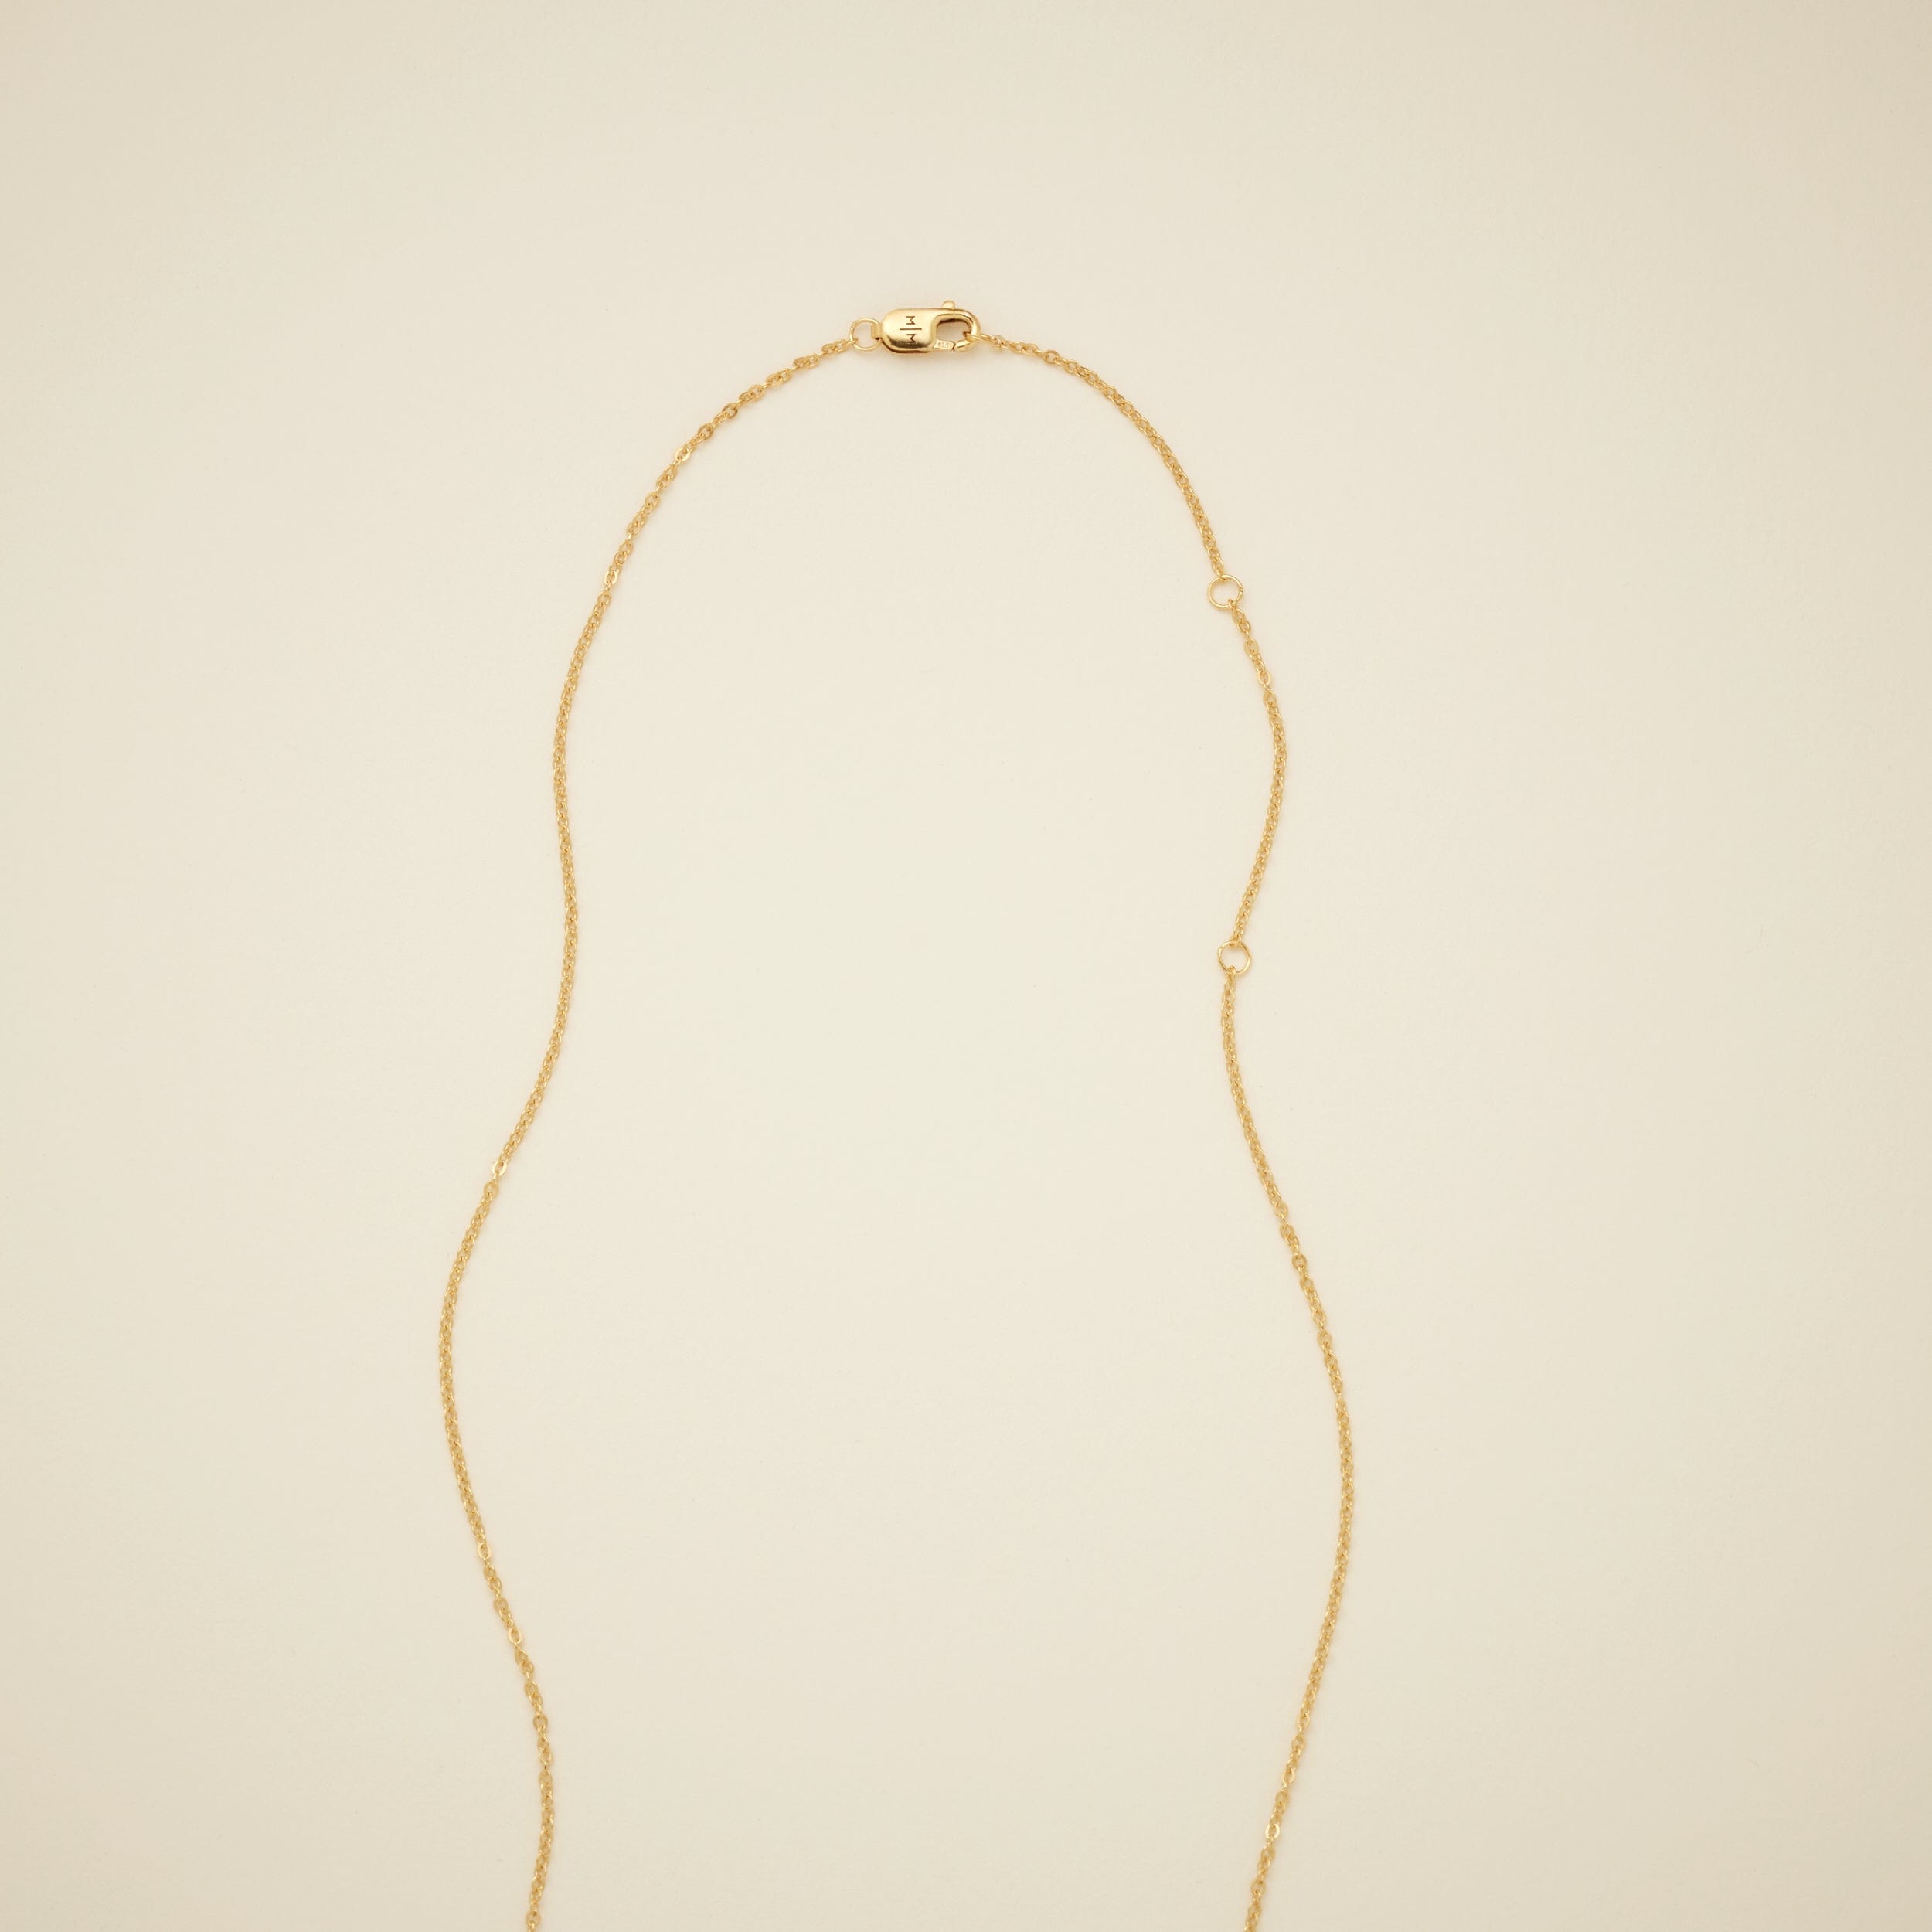 Evie Charm Stacker Necklace | The Little's Collection Necklace